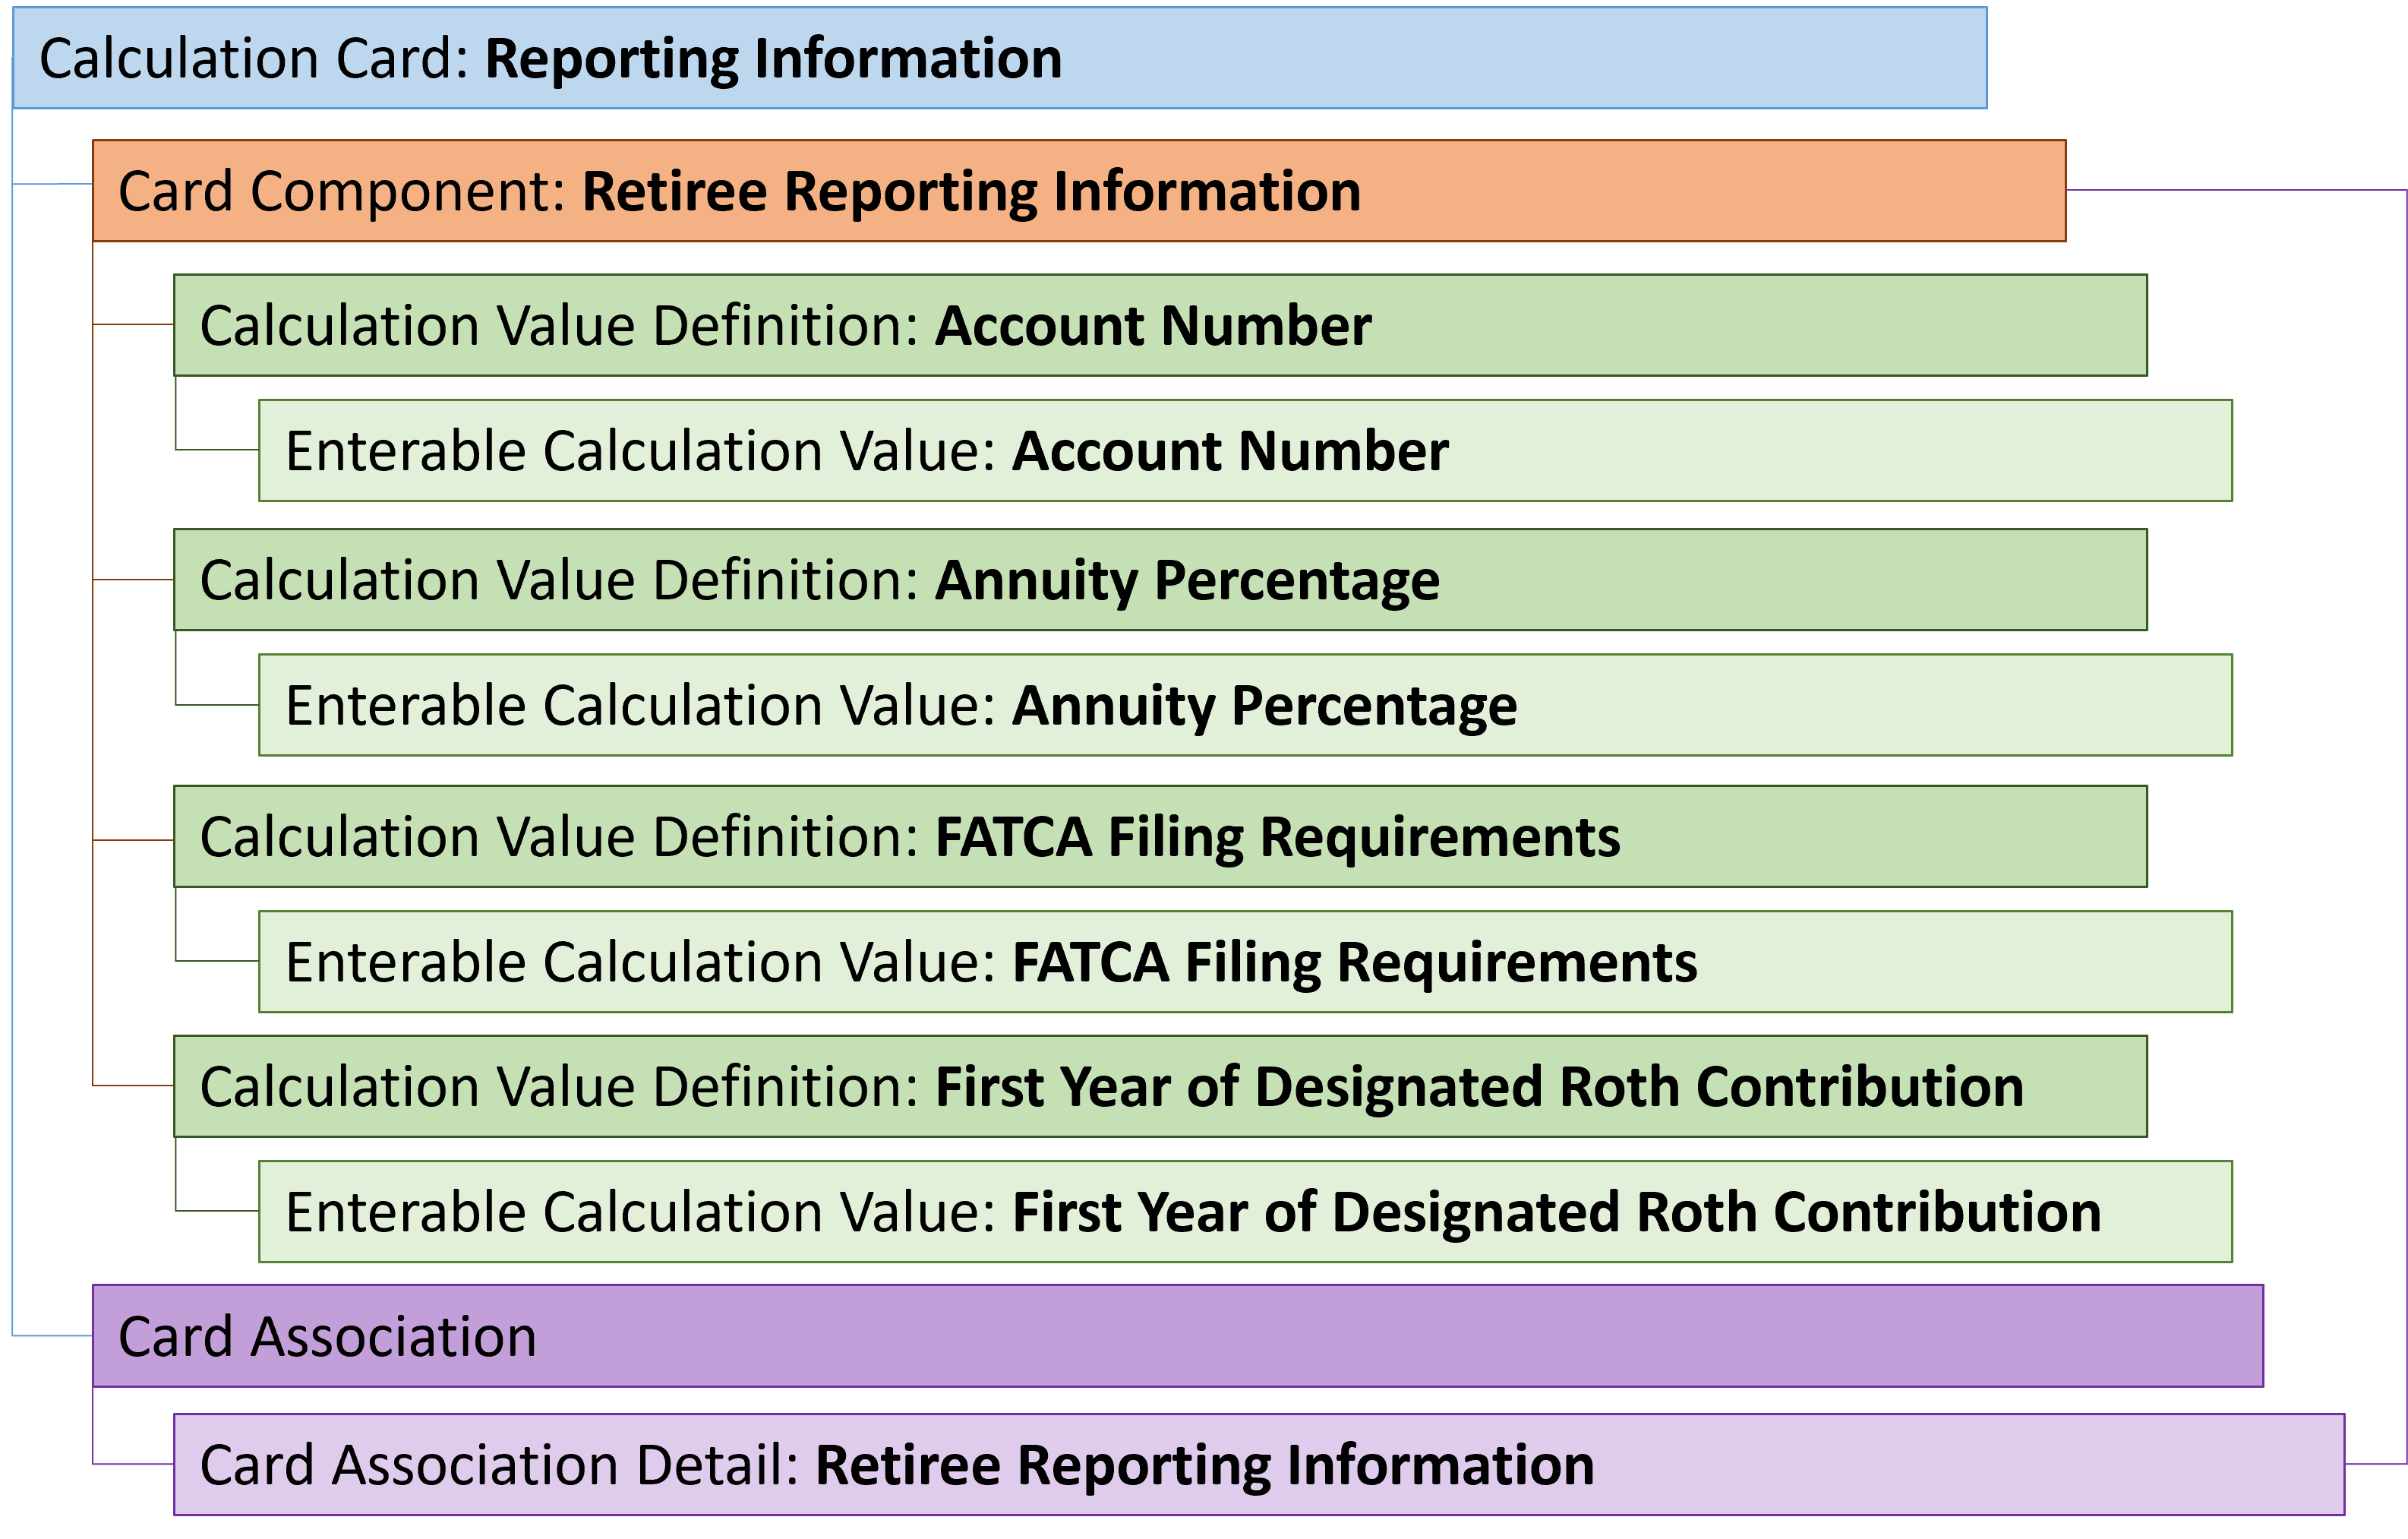 Retiree Reporting Info Card Hierarchy